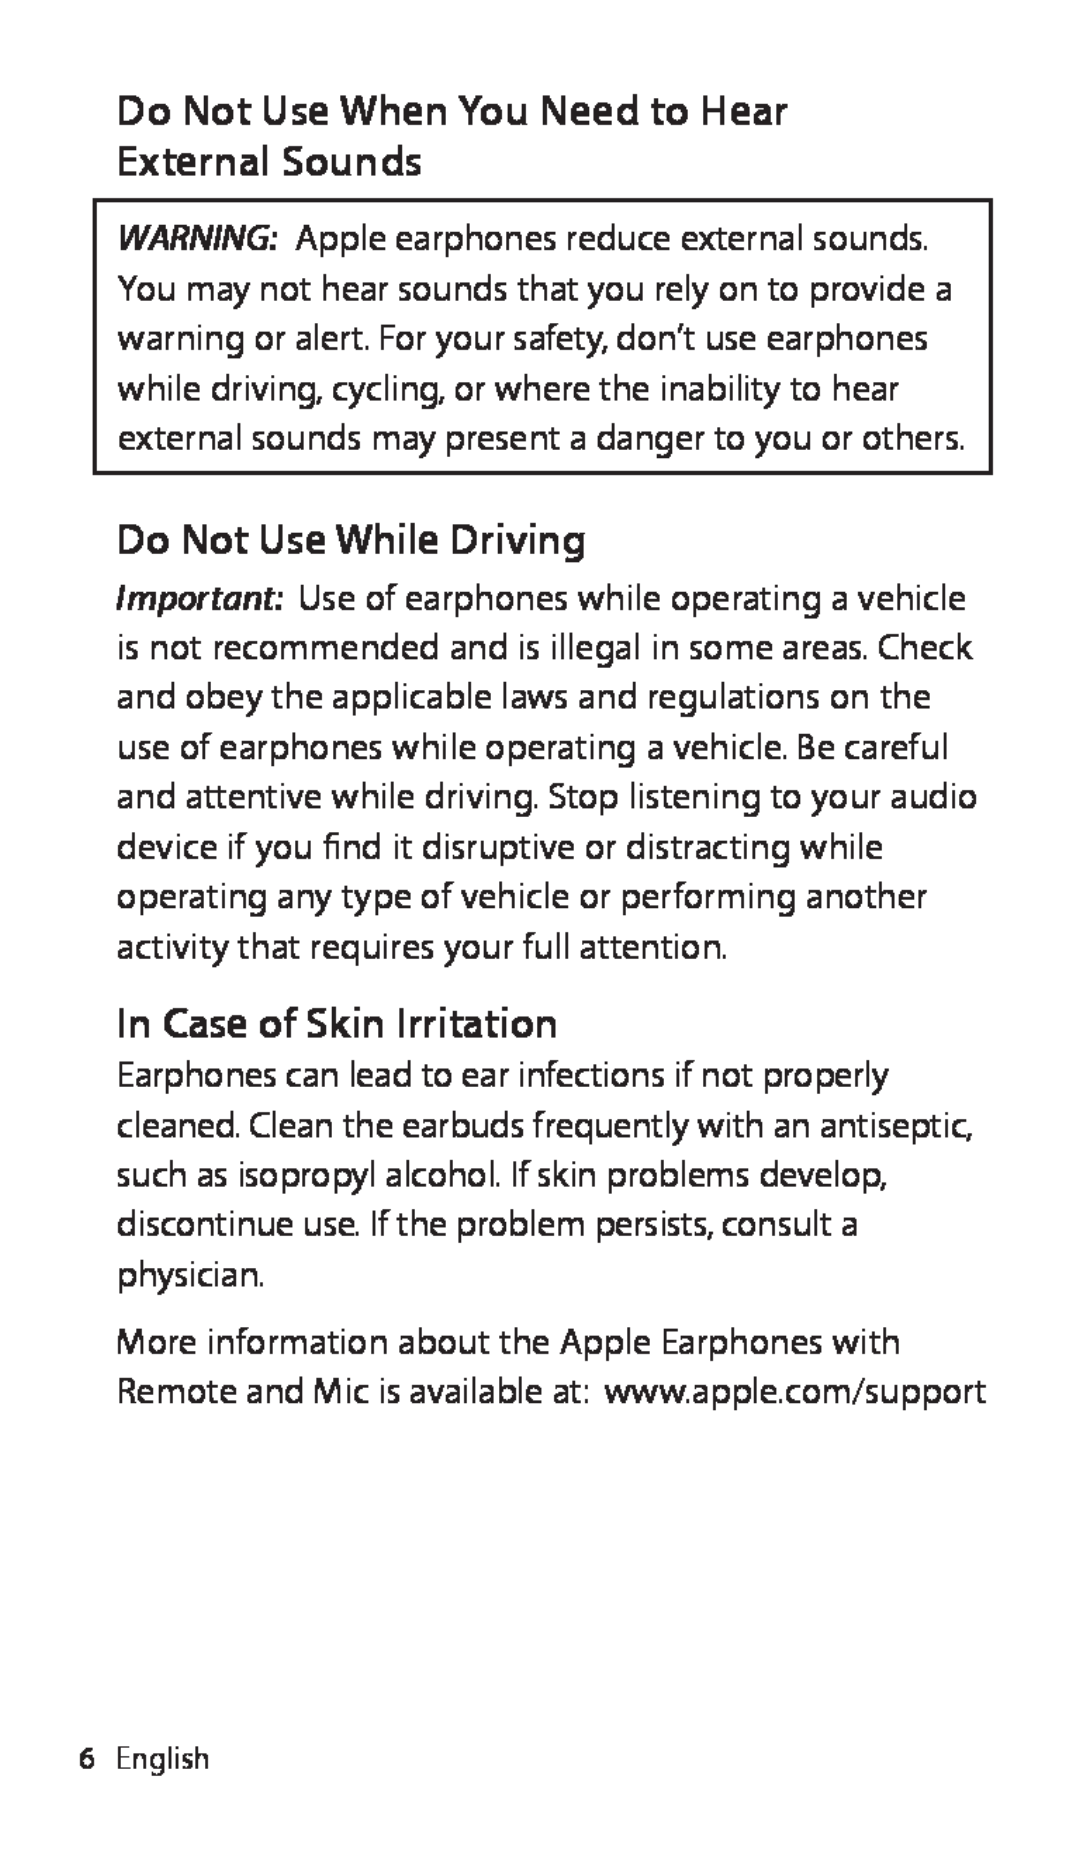 Apple ZM034-5431-A Do Not Use When You Need to Hear External Sounds, Do Not Use While Driving, In Case of Skin Irritation 